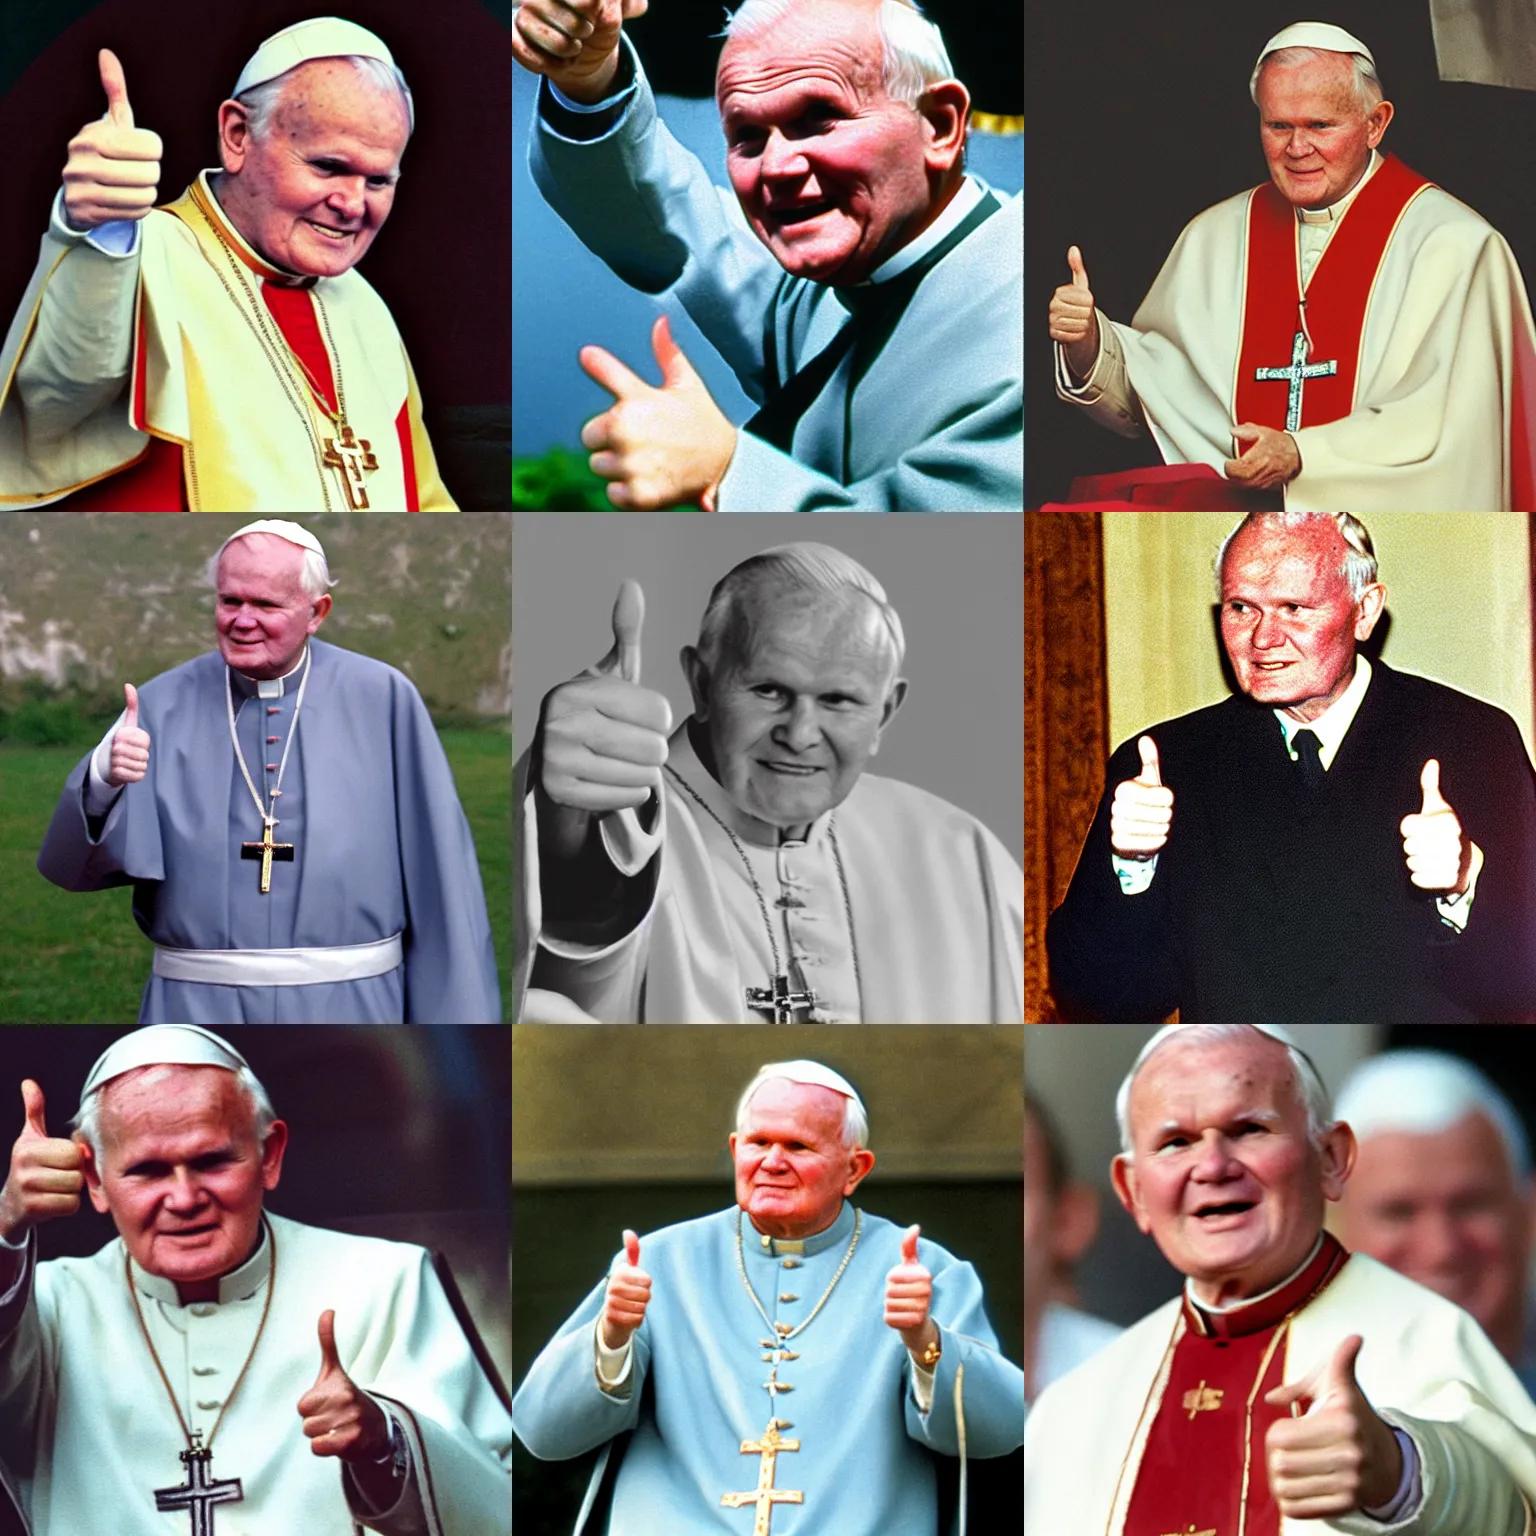 Prompt: John Paul II with two thumbs up